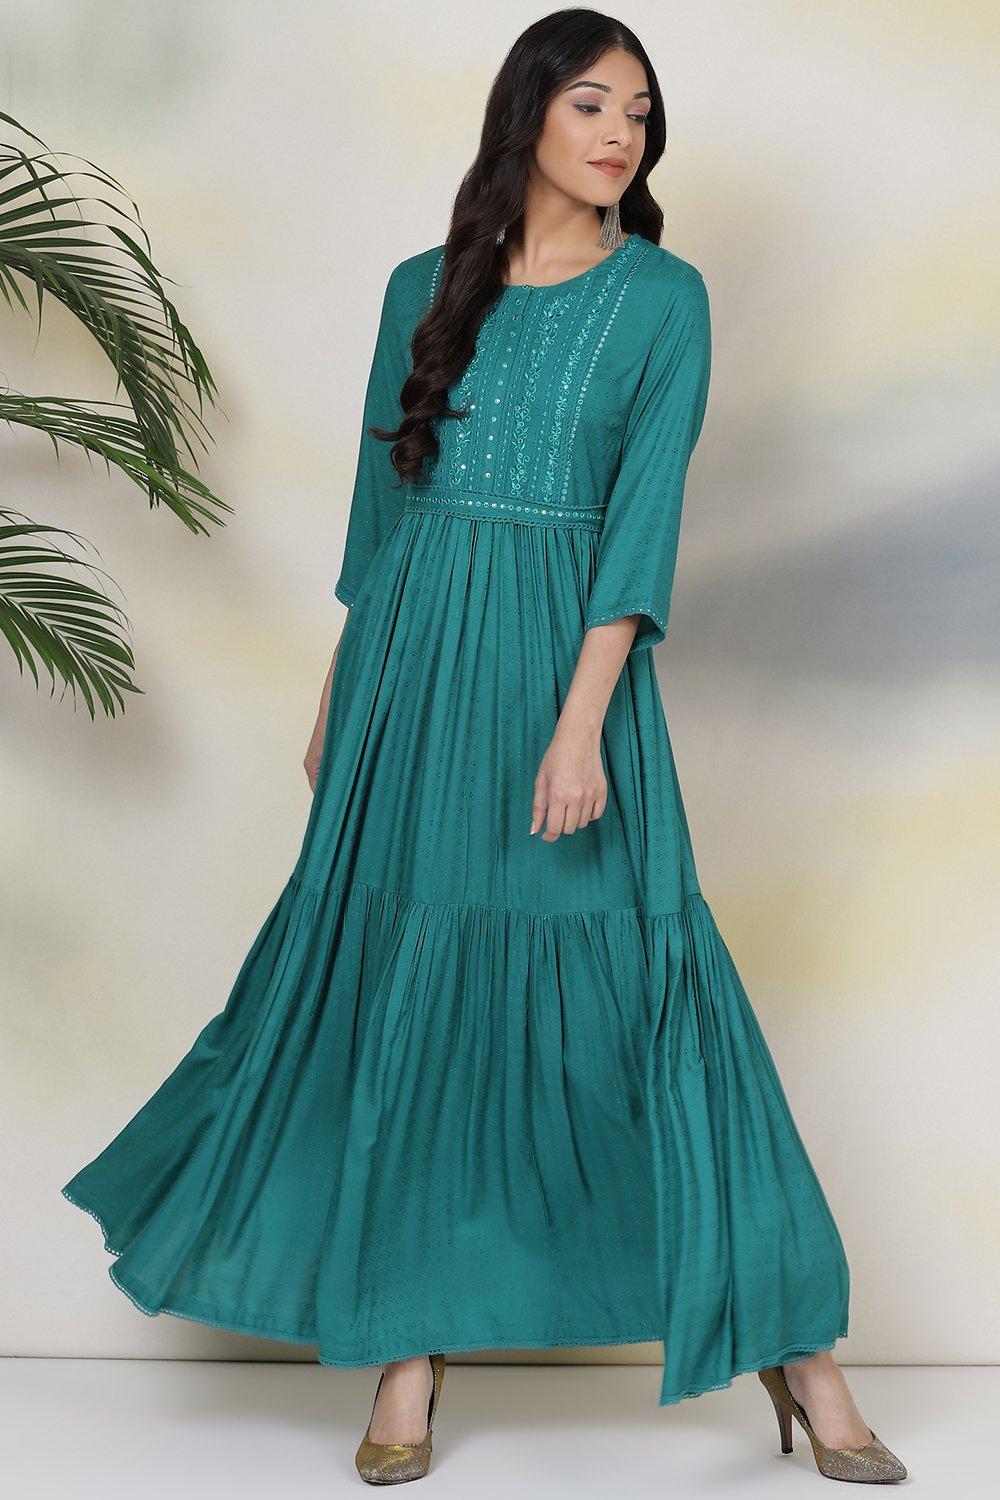 Buy Online Emerald Green Straight Rayon Fusion Wear Dress for ...